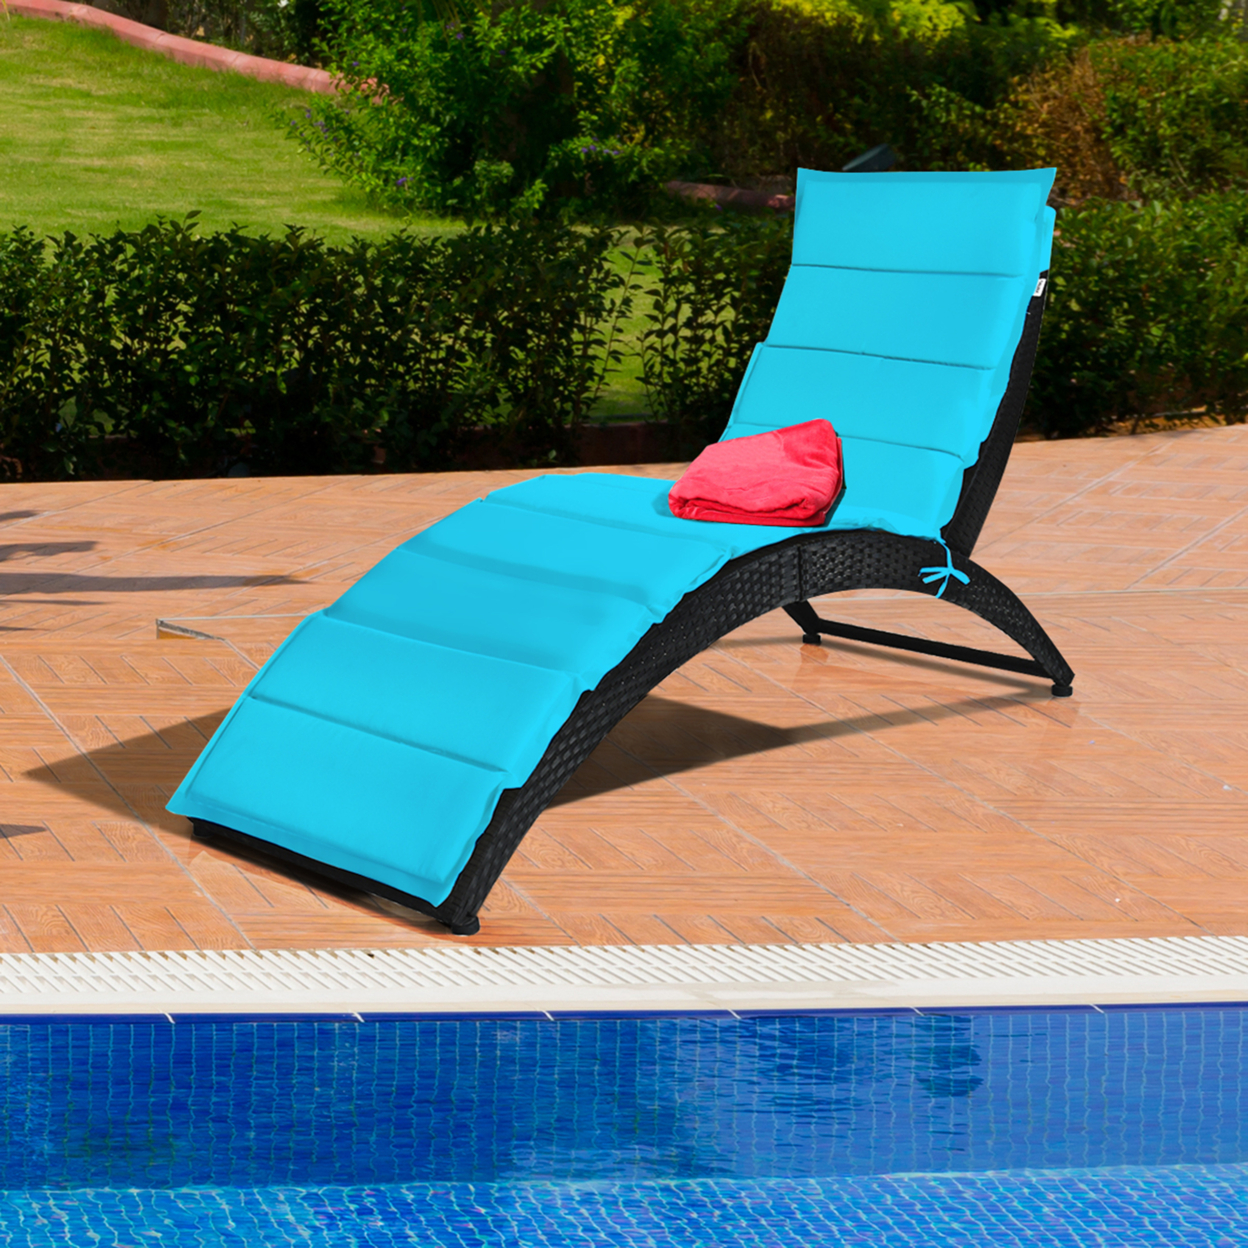 2PCS Foldable Rattan Wicker Chaise Lounge Chair W/ Turquoise Cushion Patio Outdoor